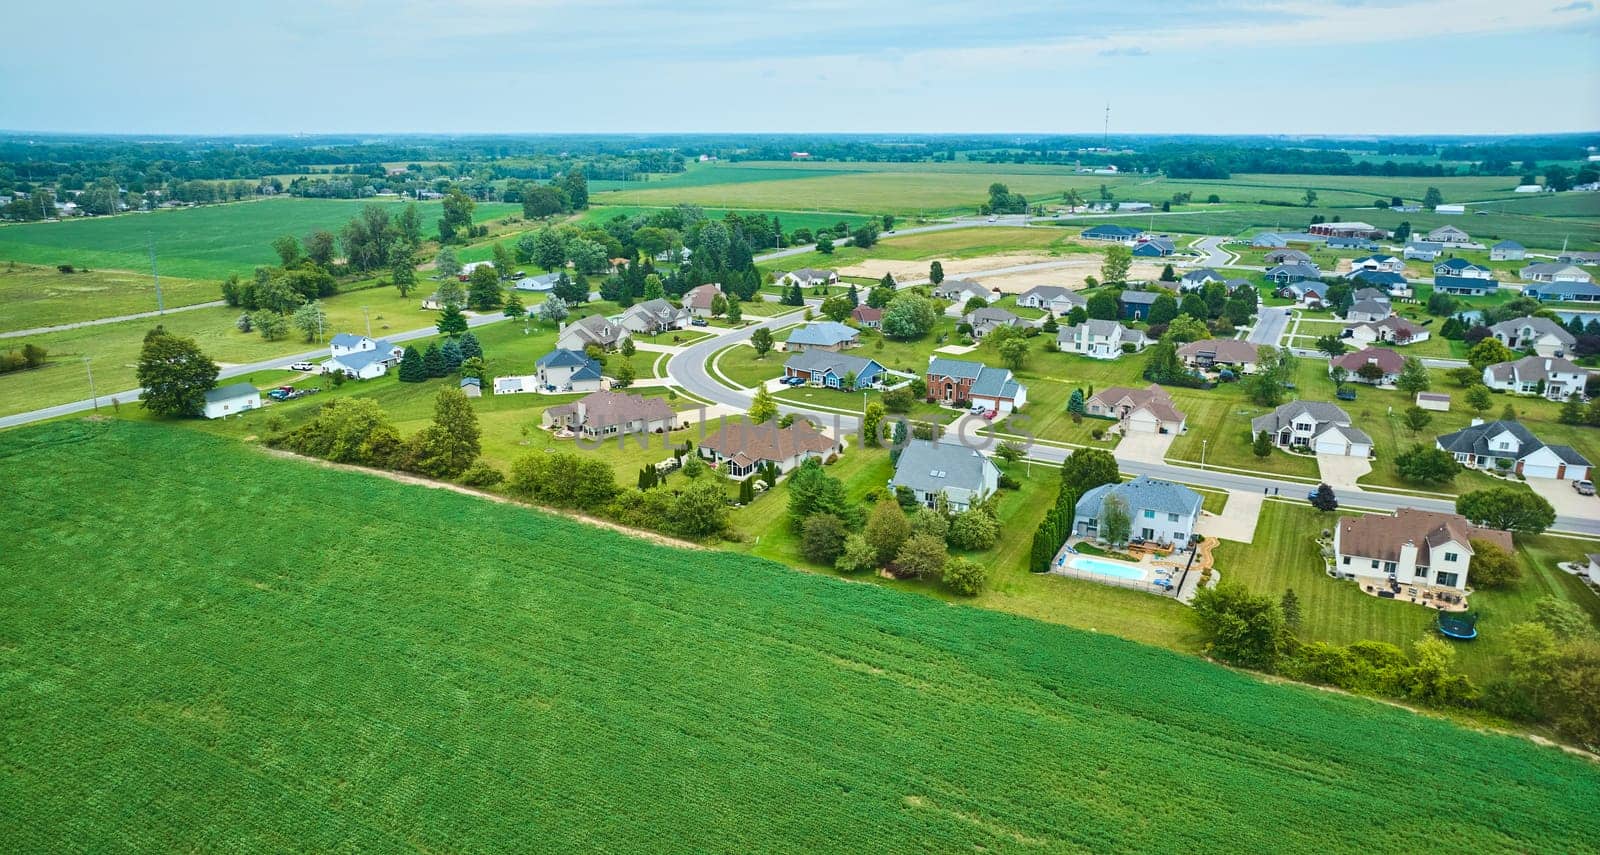 Image of Crops in farmland field giving way to rural neighborhood with suburban styled homes aerial